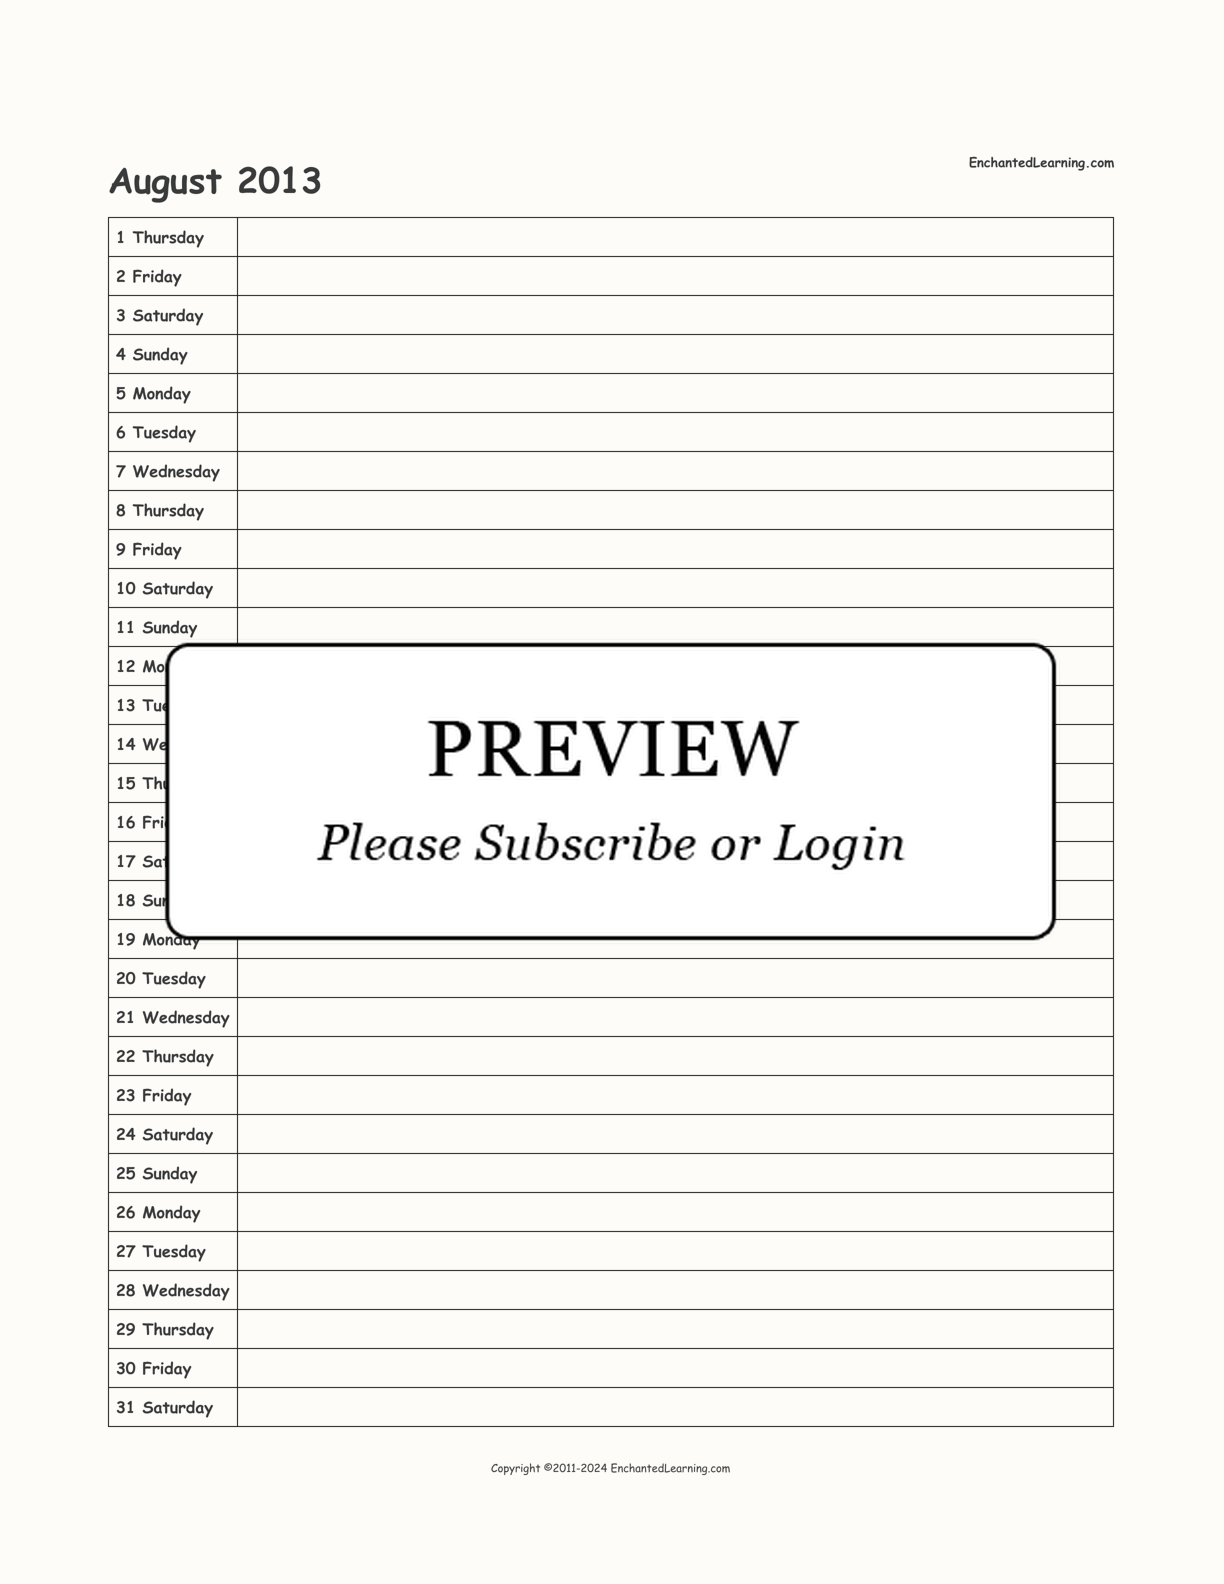 2013 Scheduling Calendar interactive printout page 8